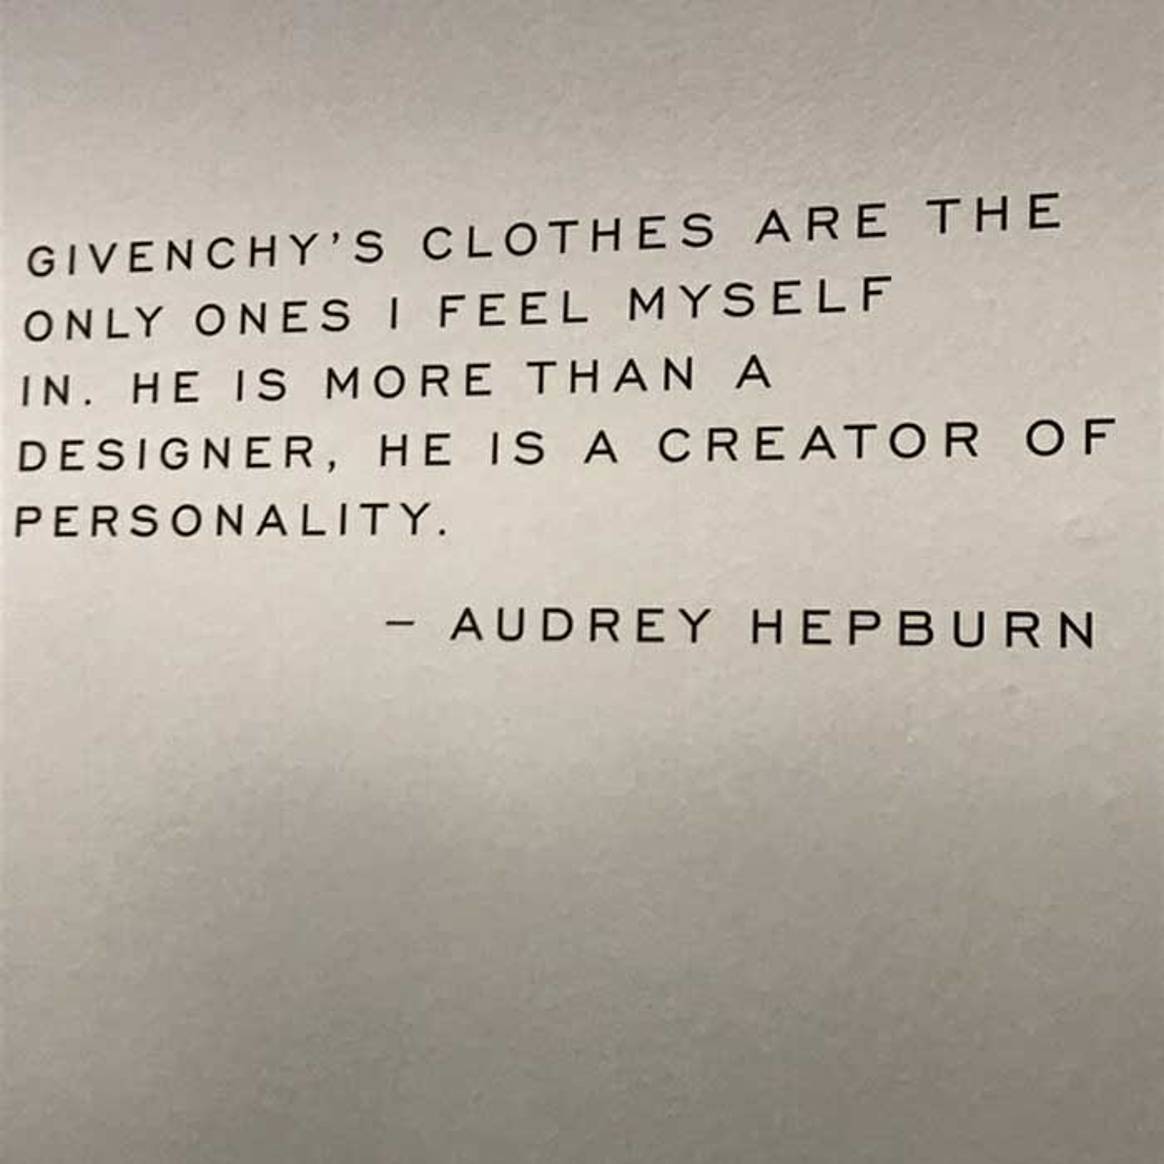 New Givenchy exhibition honours Audrey Hepburn